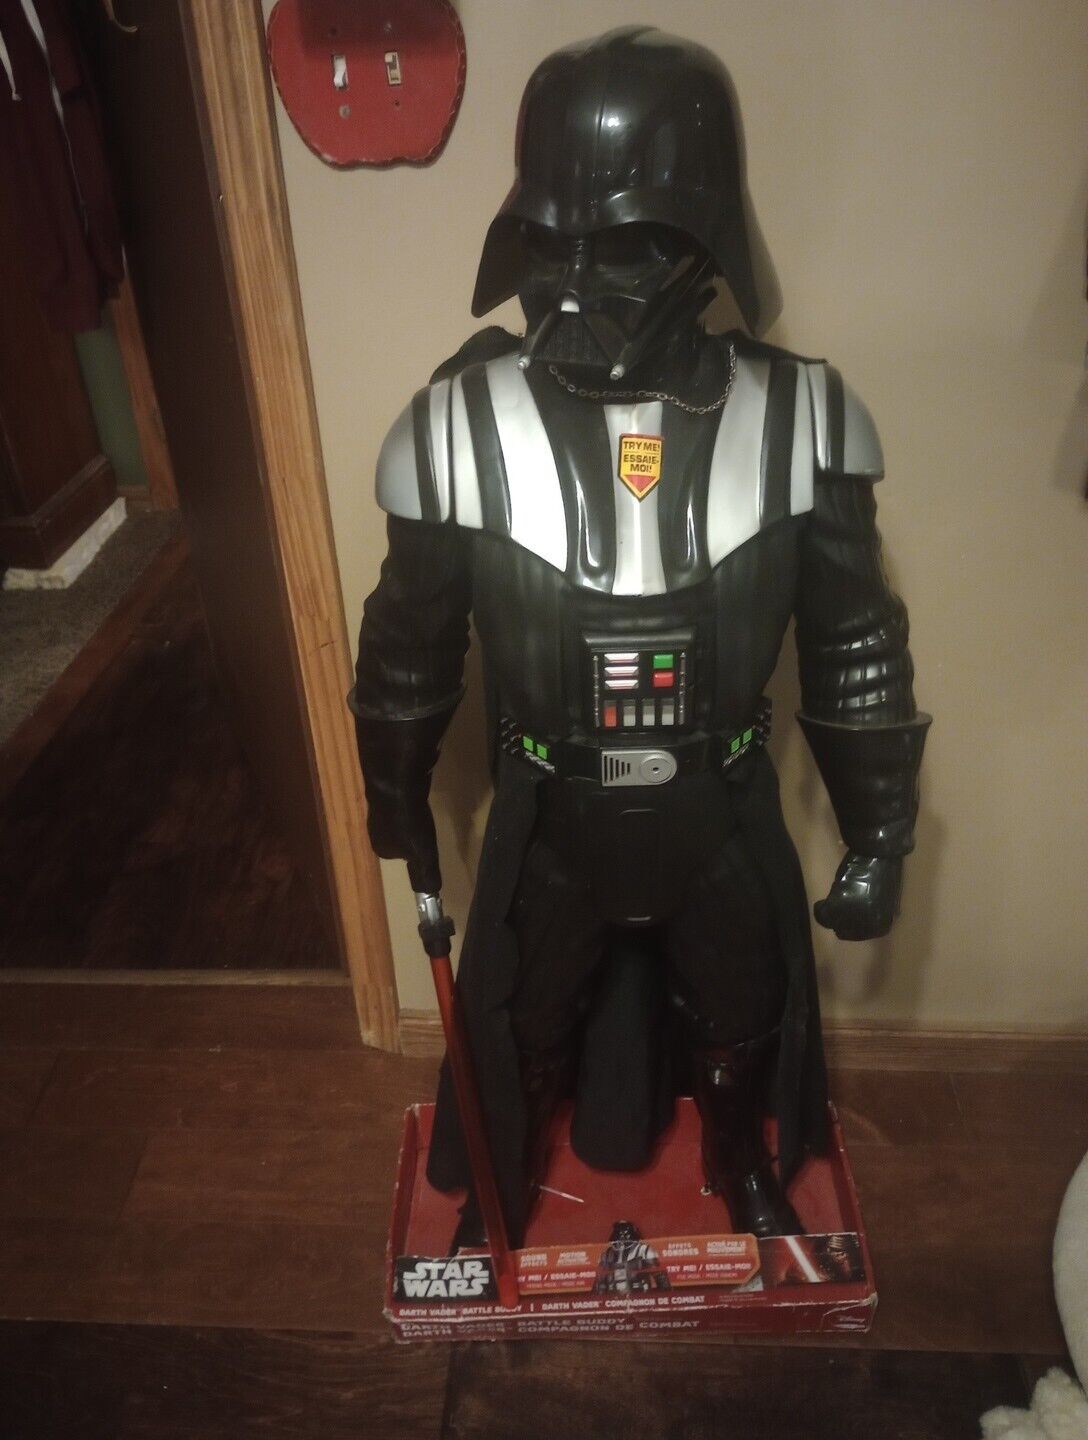 STAR WARS DARTH VADER with Light Up Sword, Breathing 1/2 life size action figure